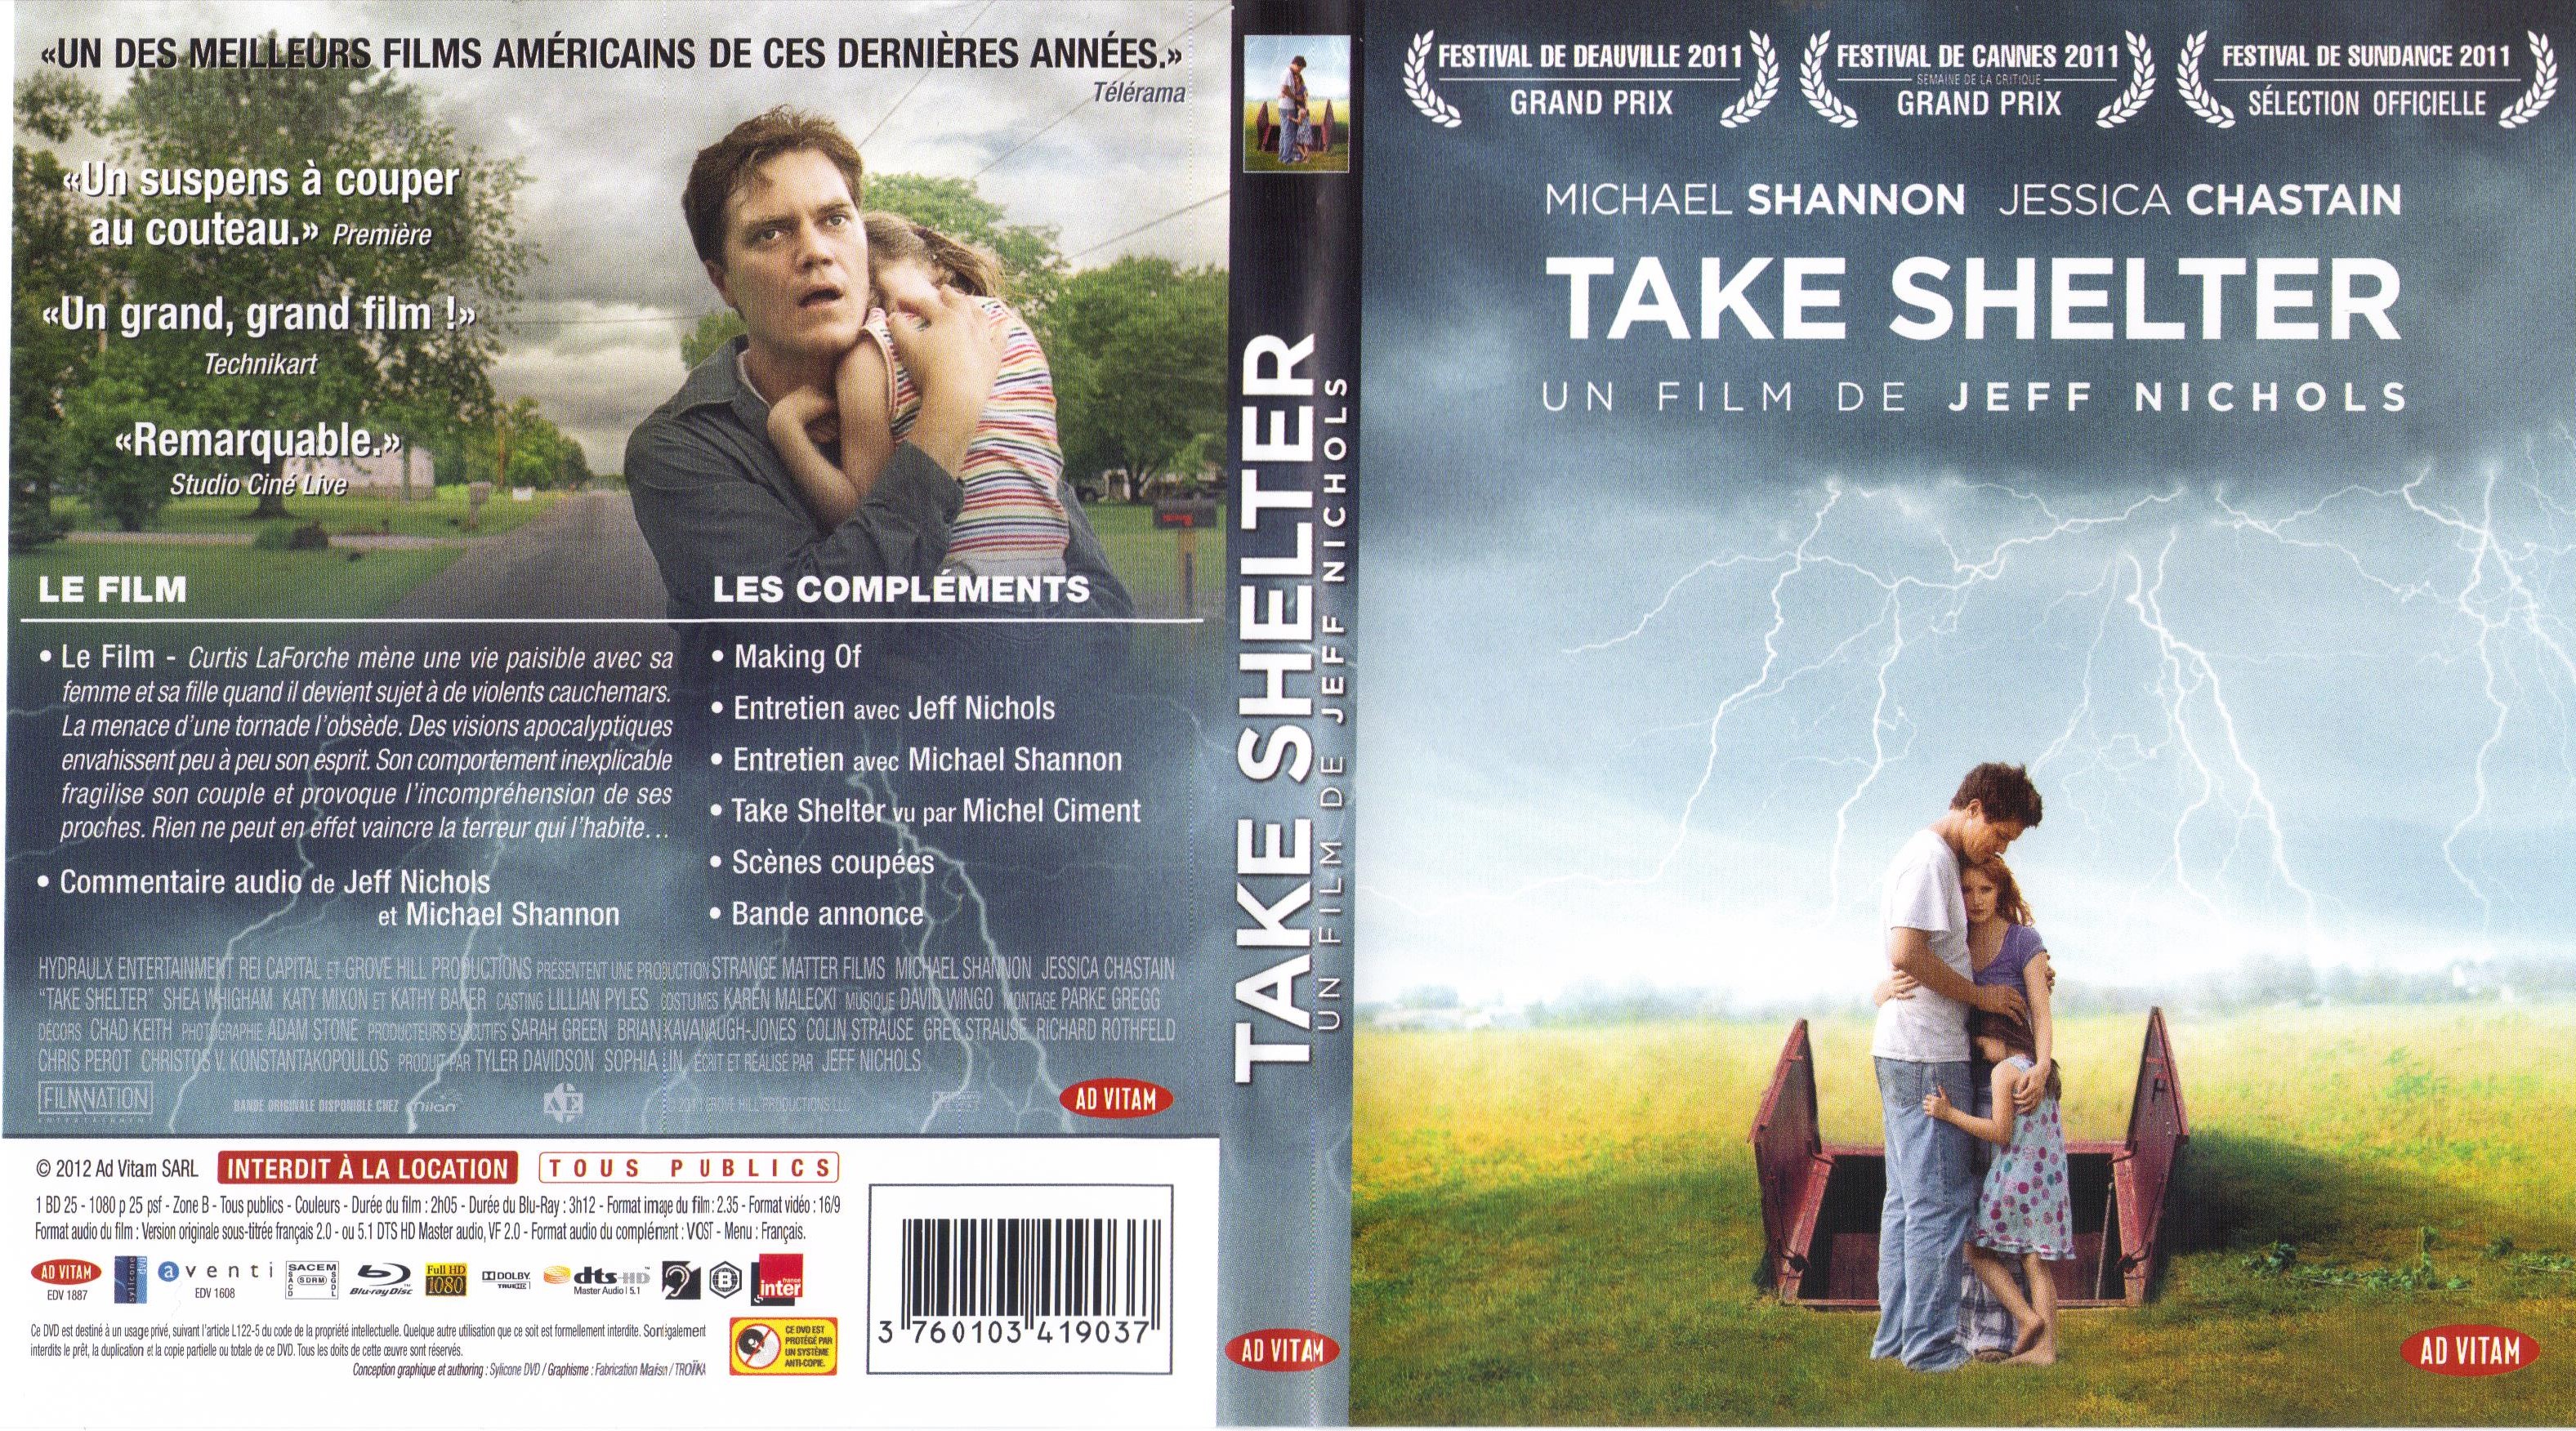 Jaquette DVD Take Shelter (BLU-RAY)